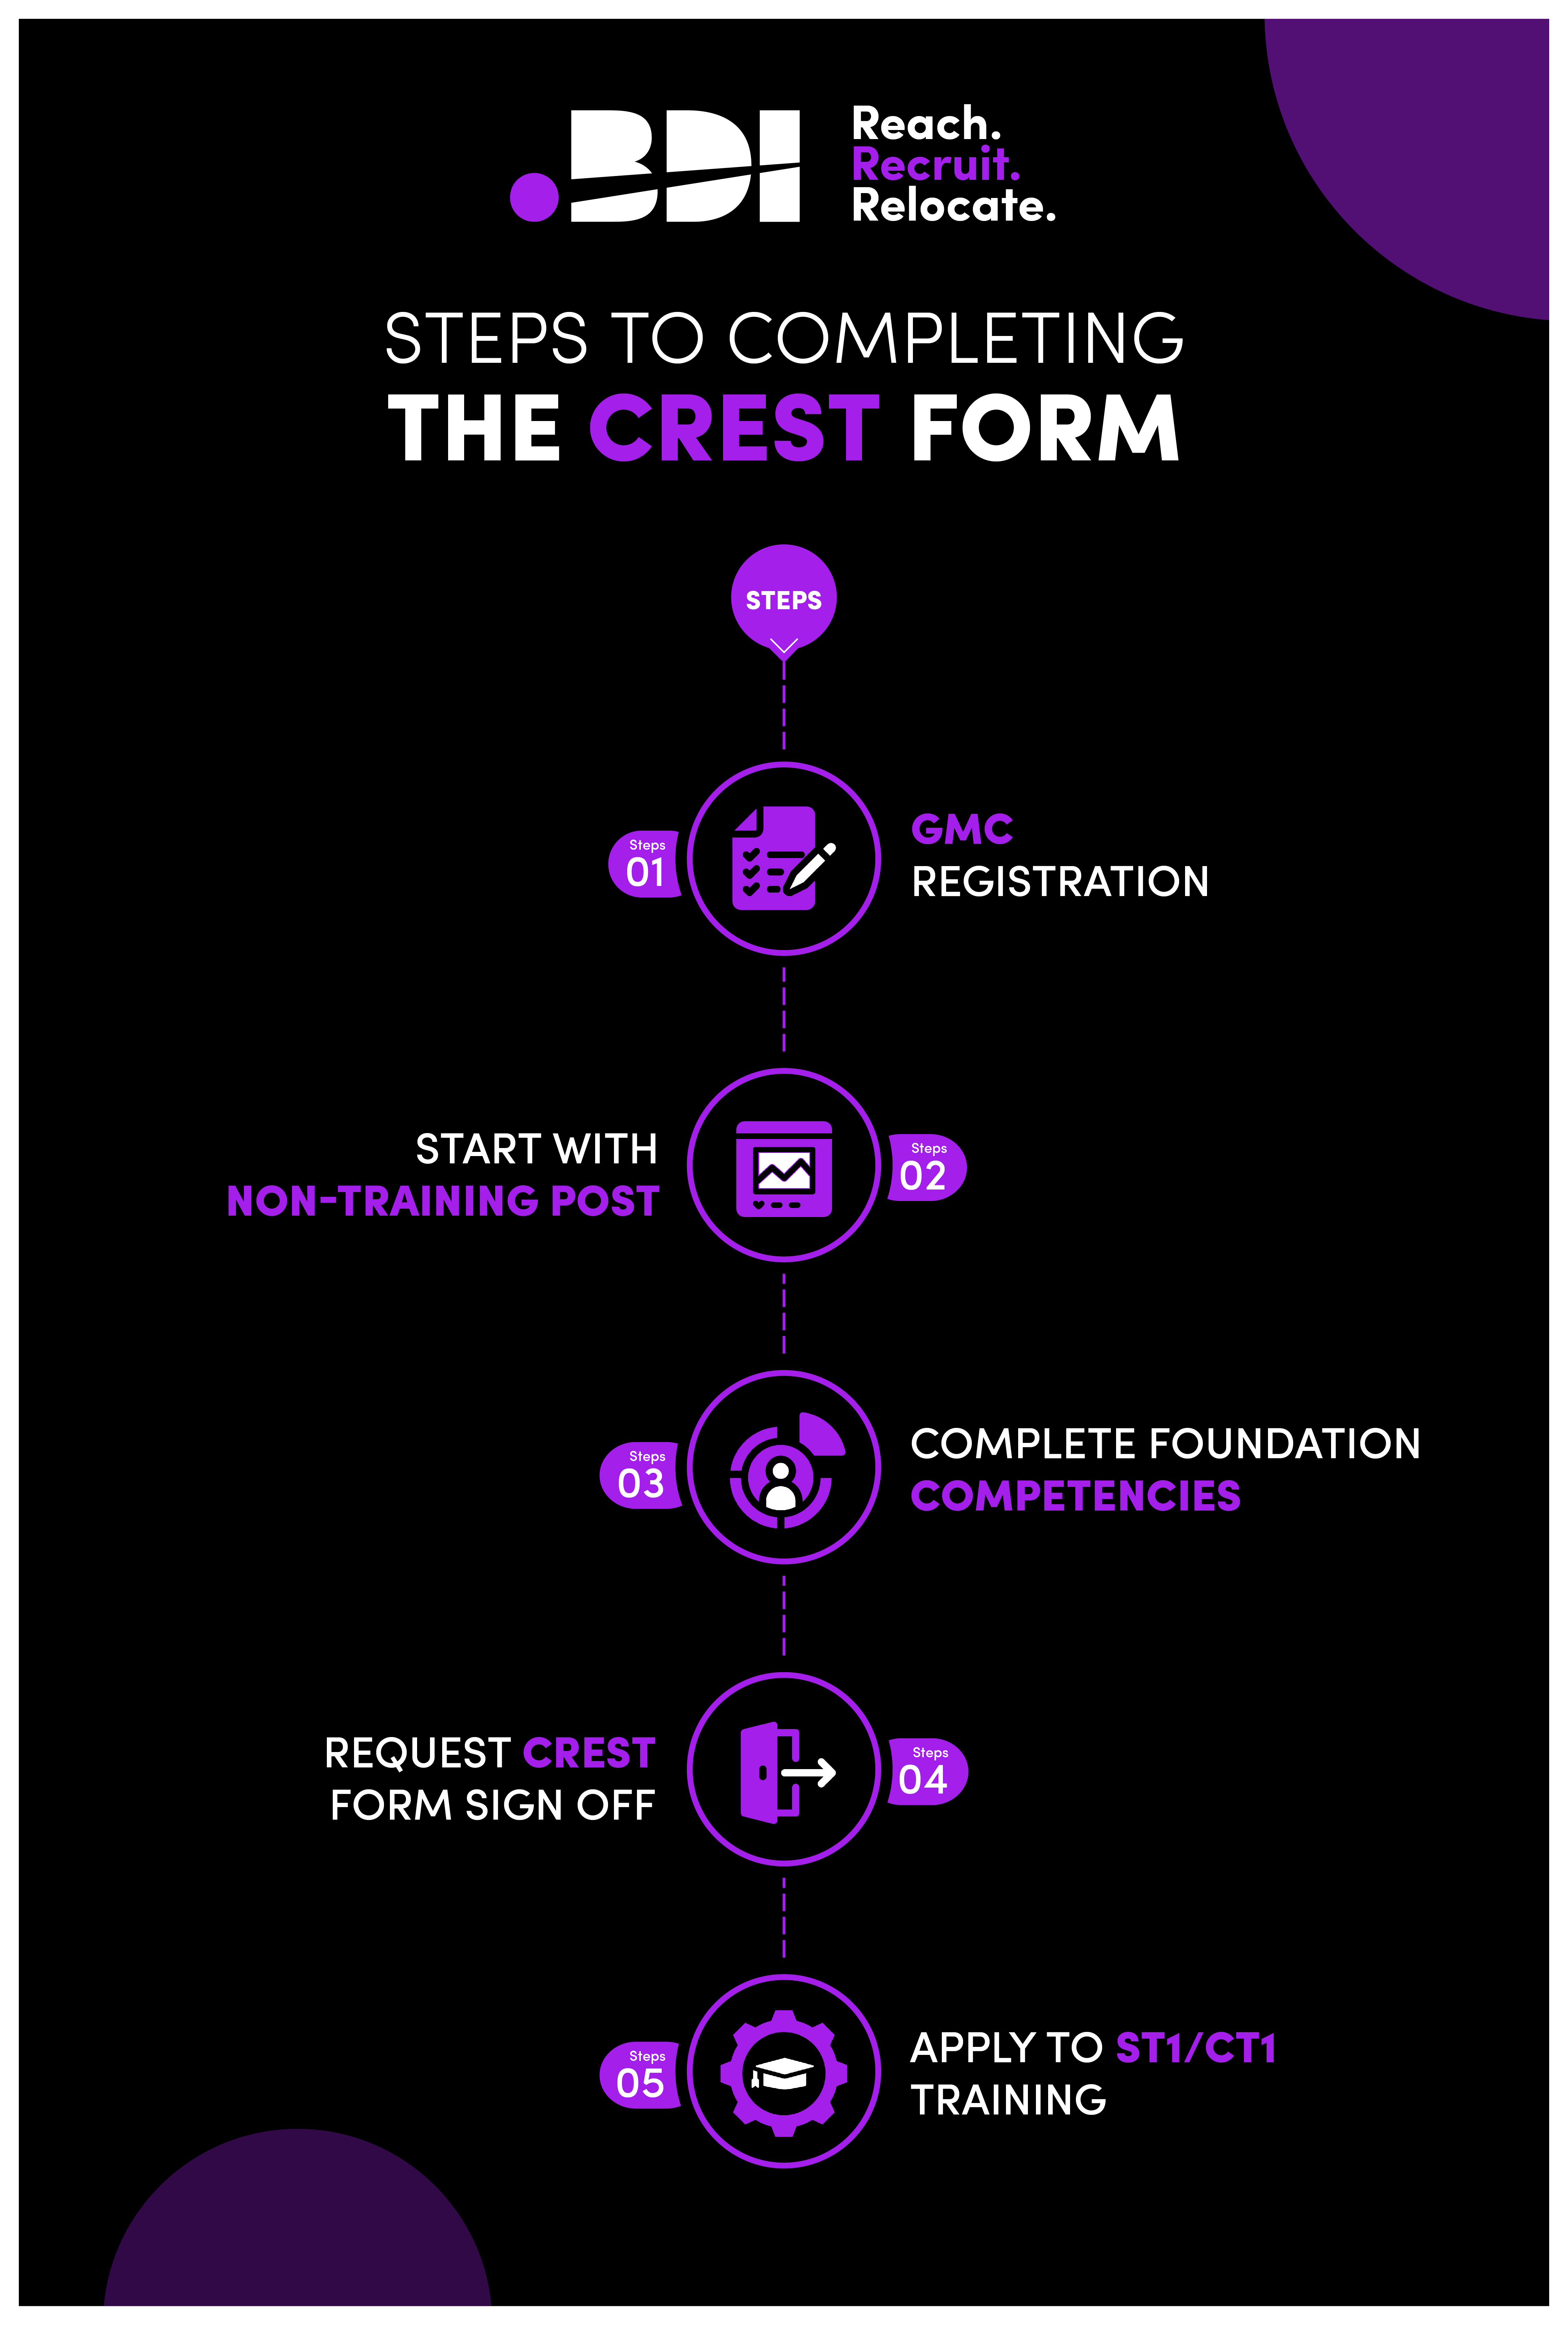 5 Steps to completing the CREST form